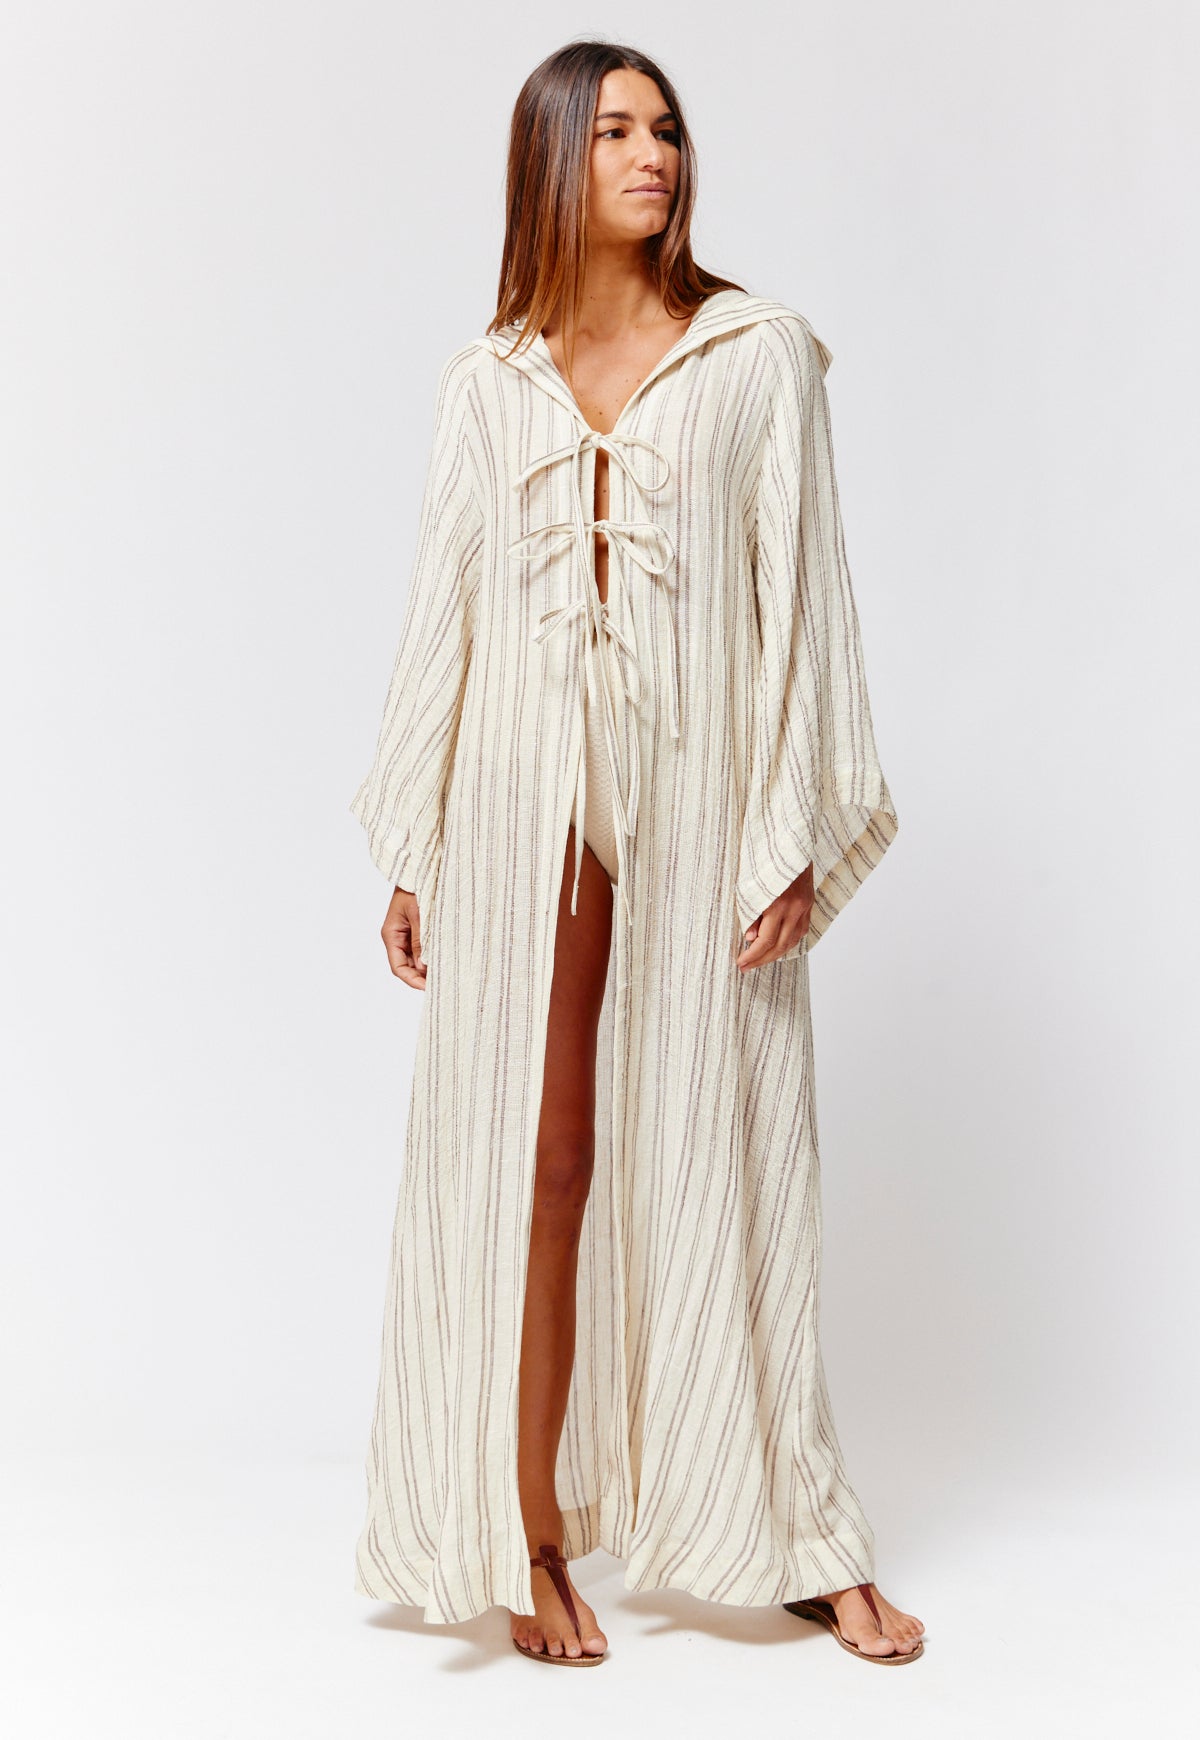 THE BEACH CAPE in NATURAL & BROWN STRIPED CHIOS GAUZE